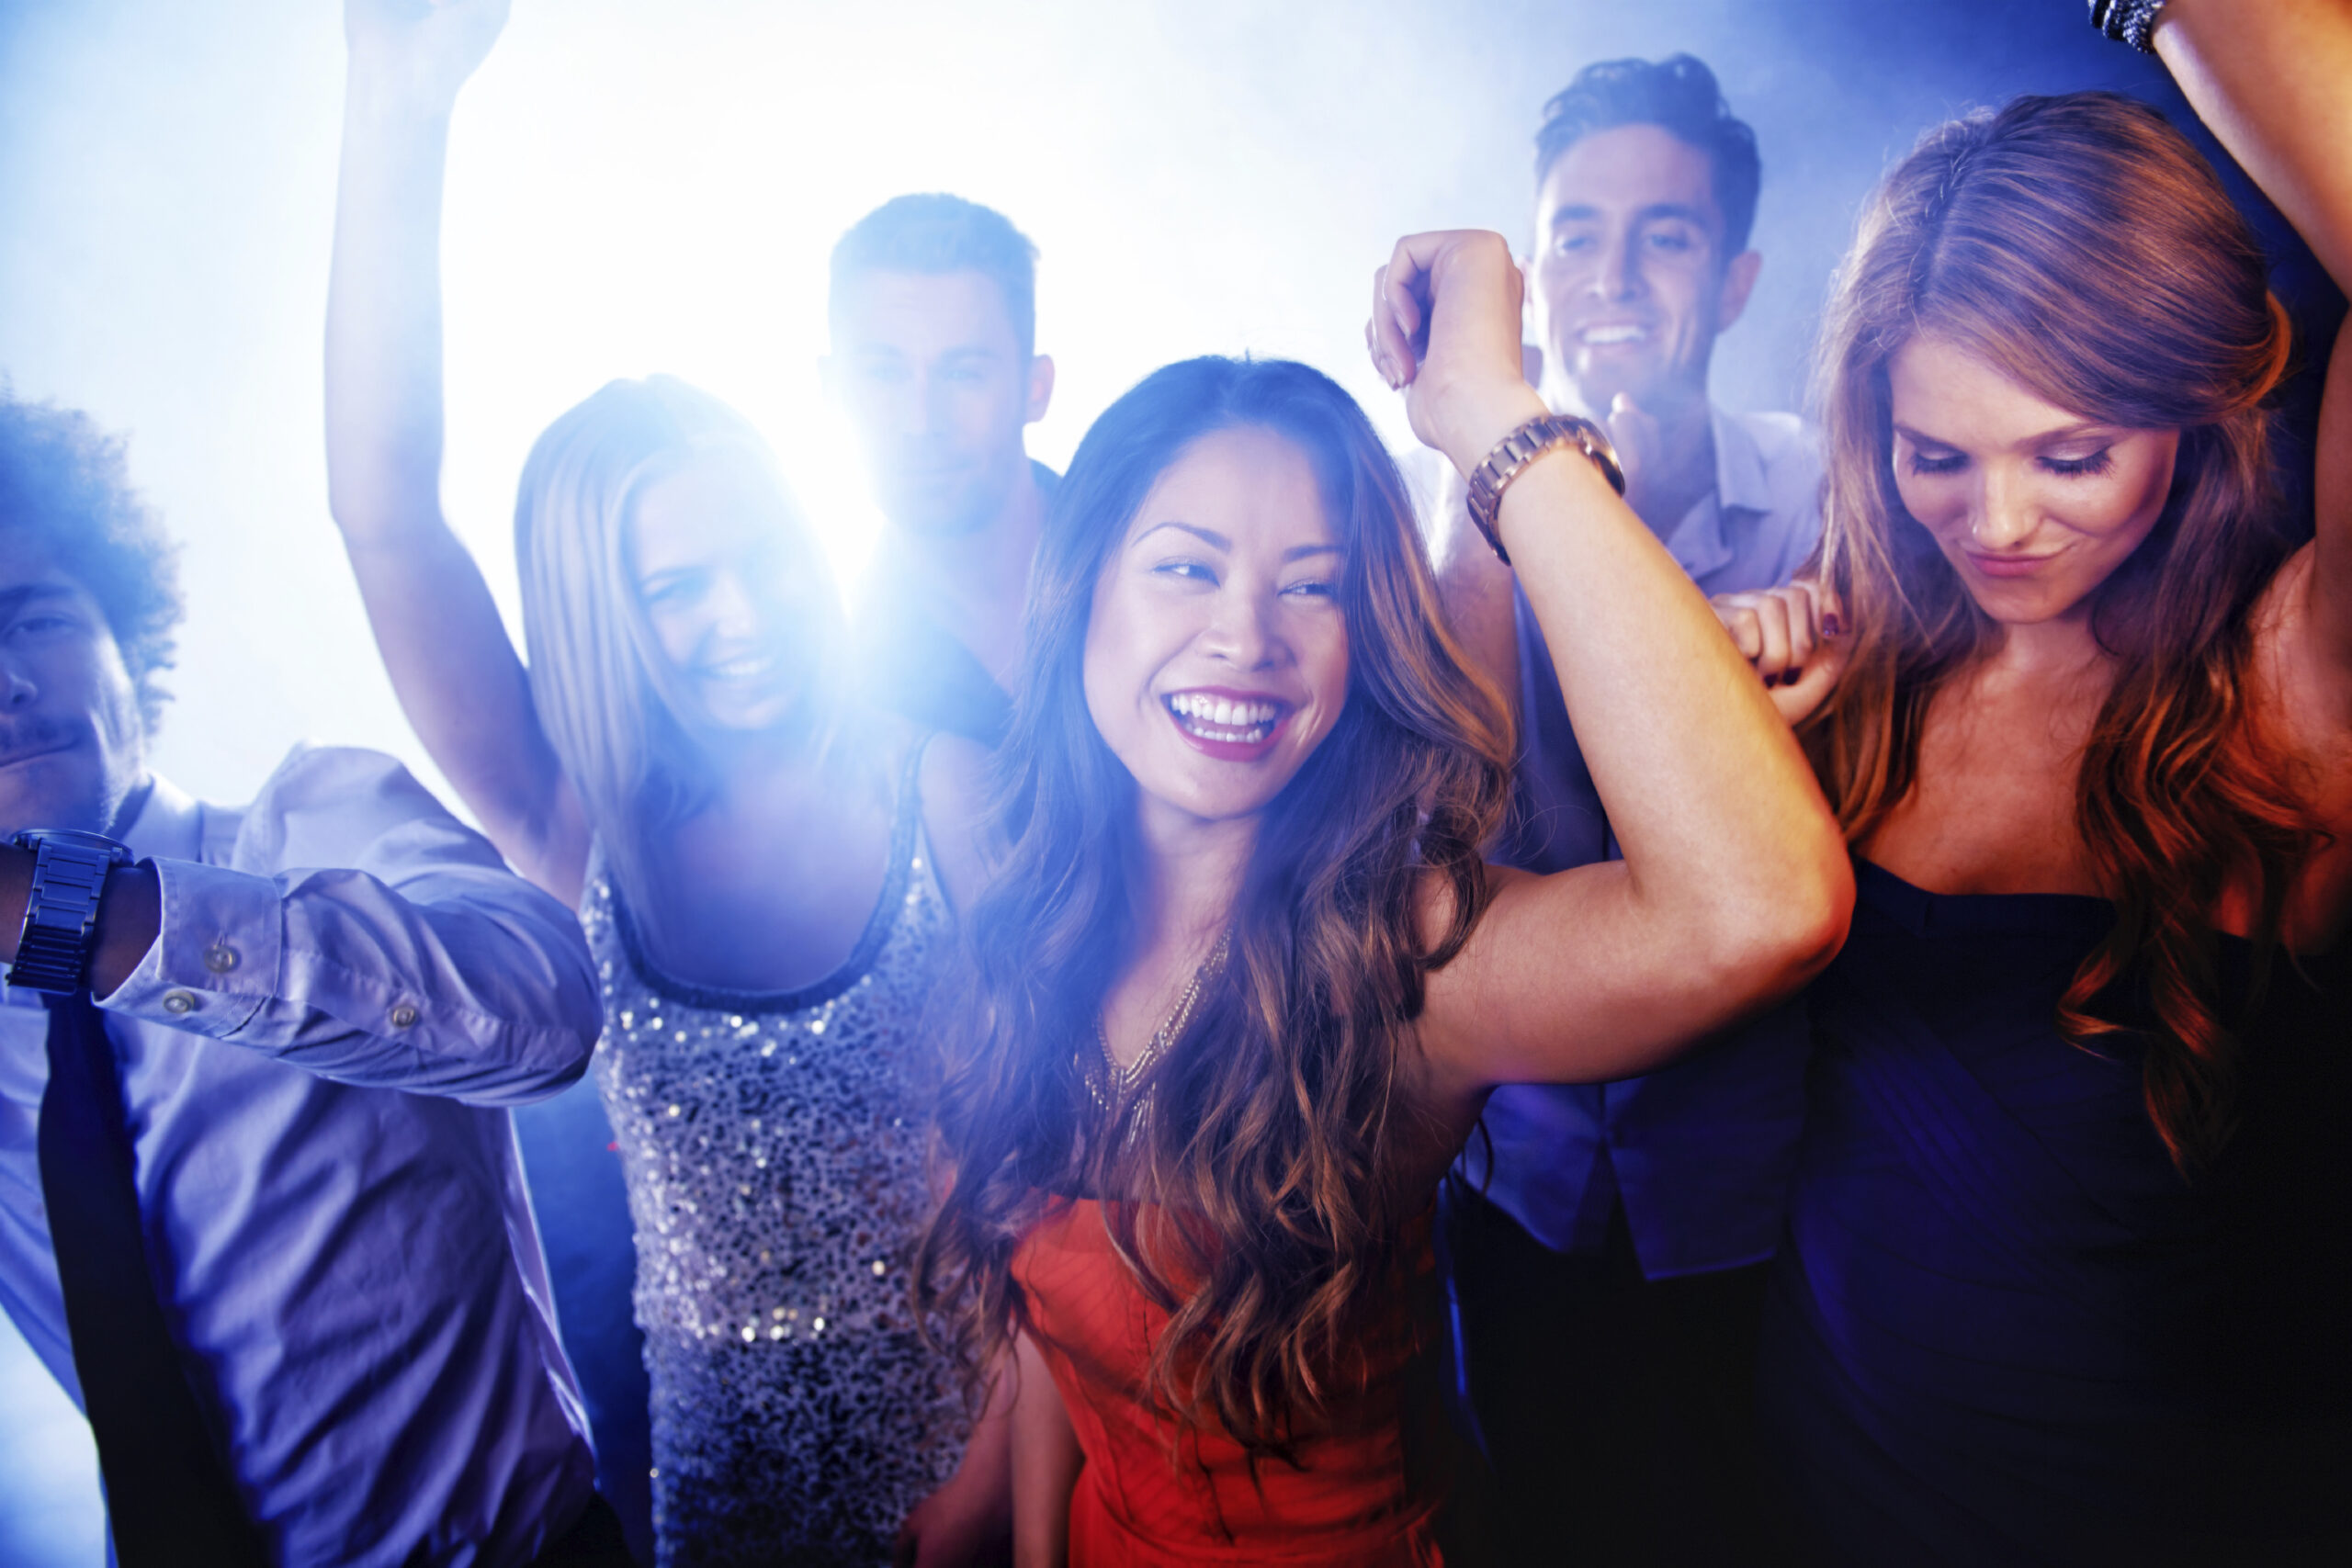 A group of young people dancing in a club